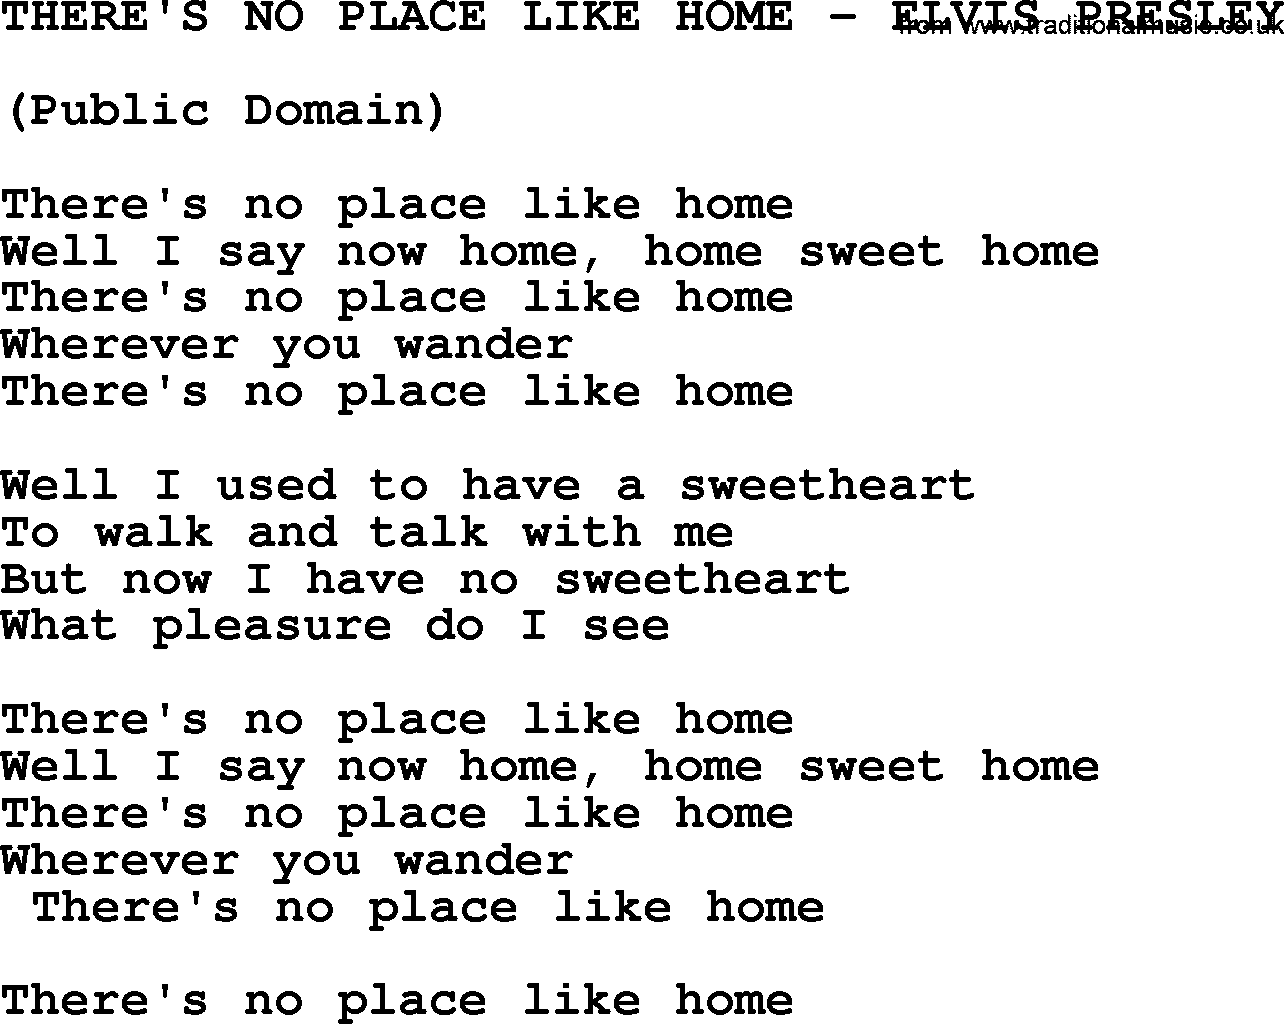 There's No Place Like Home-Elvis Presley-.txt, by Elvis Presley ...